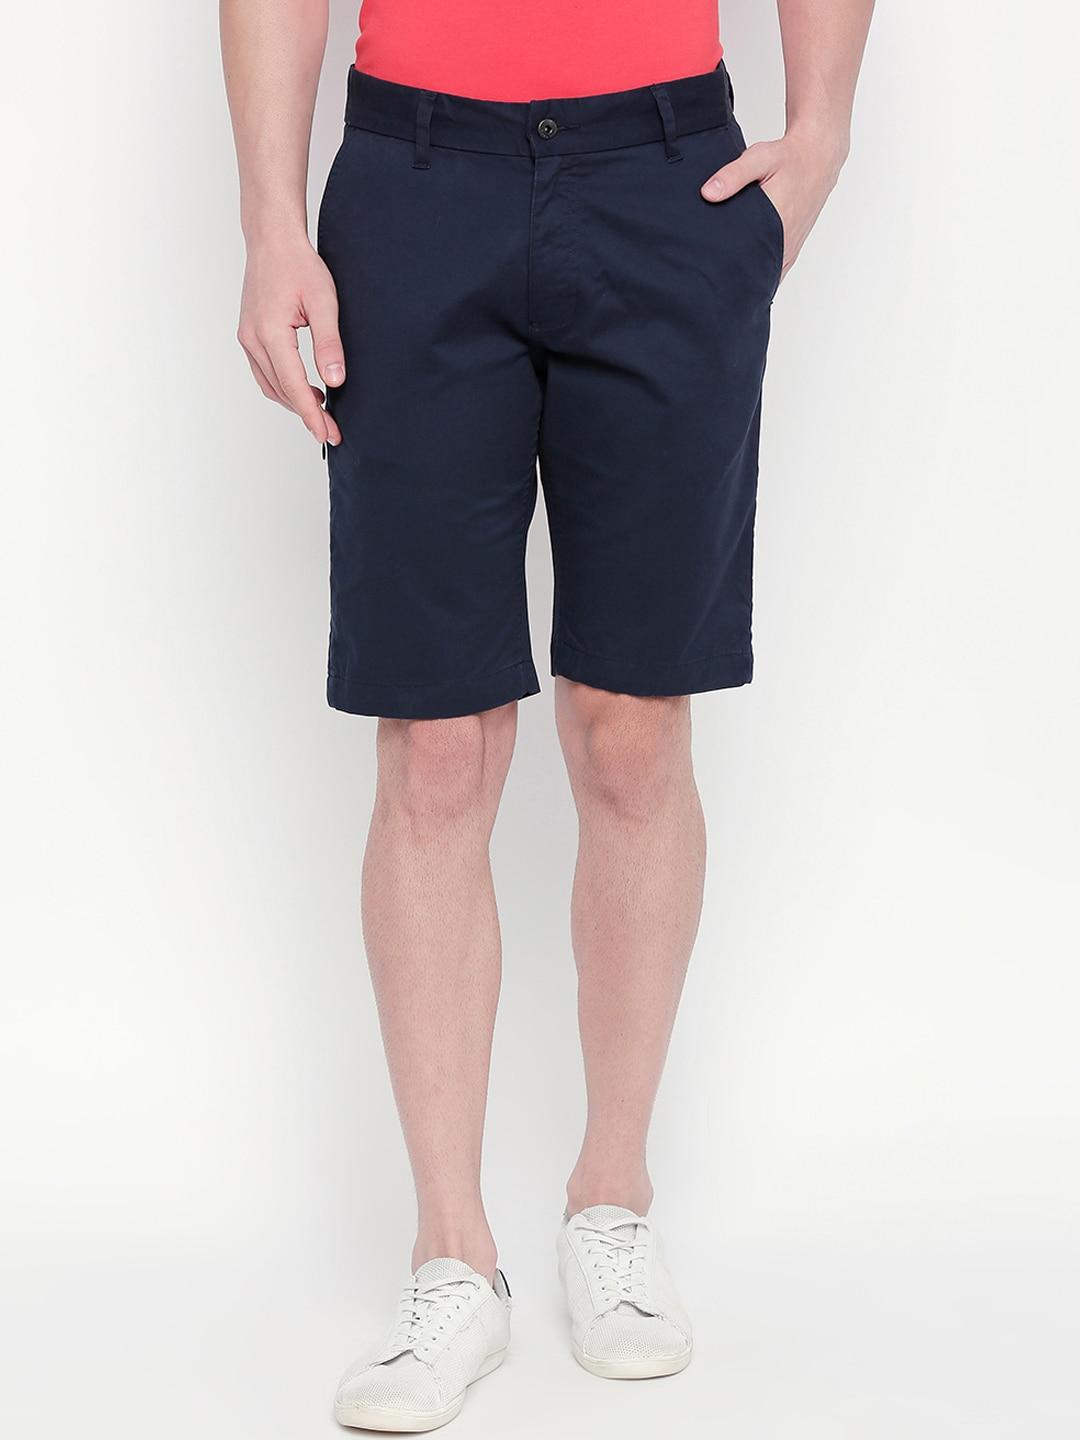 kenneth-cole-men-navy-blue-solid-regular-fit-chino-shorts